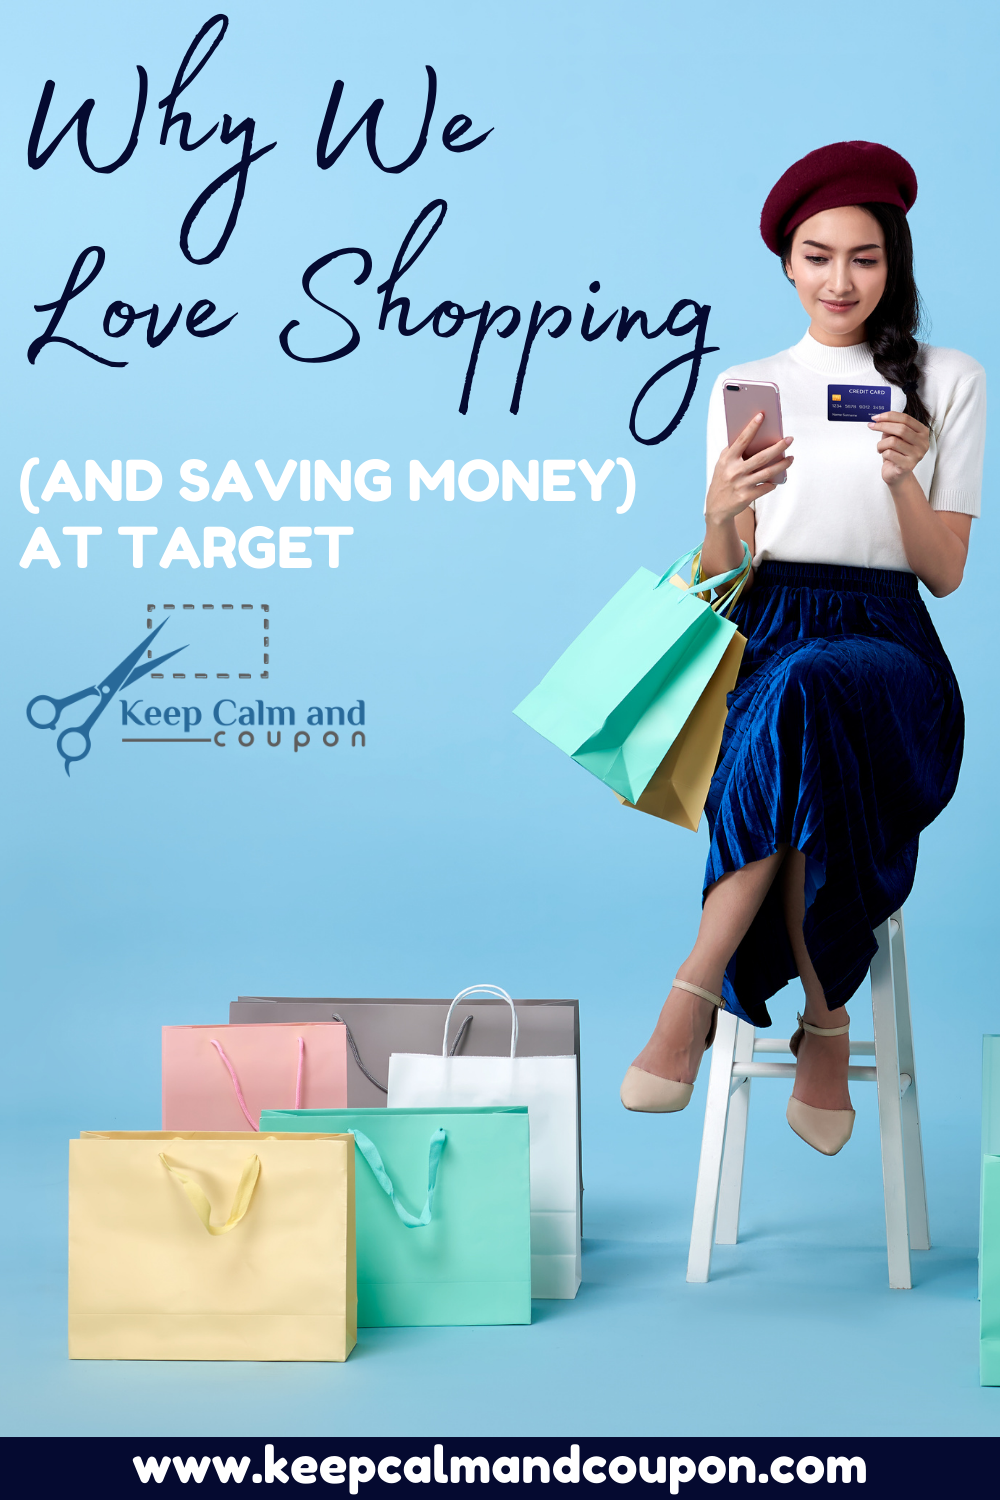 Why We Love Shopping (and Saving Money) at Target